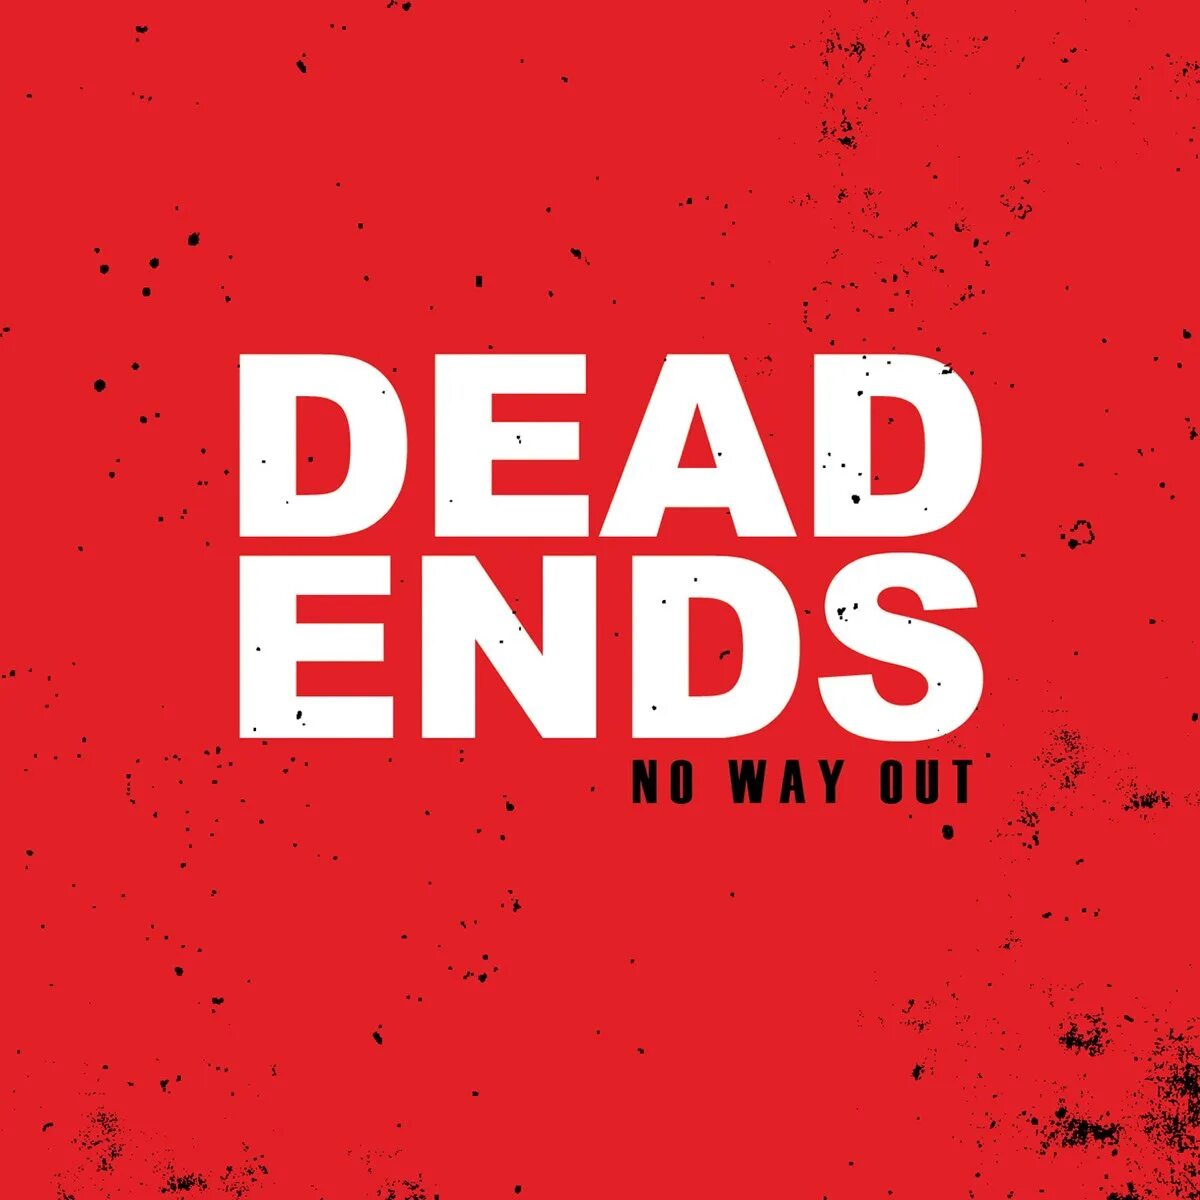 No way. No way out. Dead end их текст.